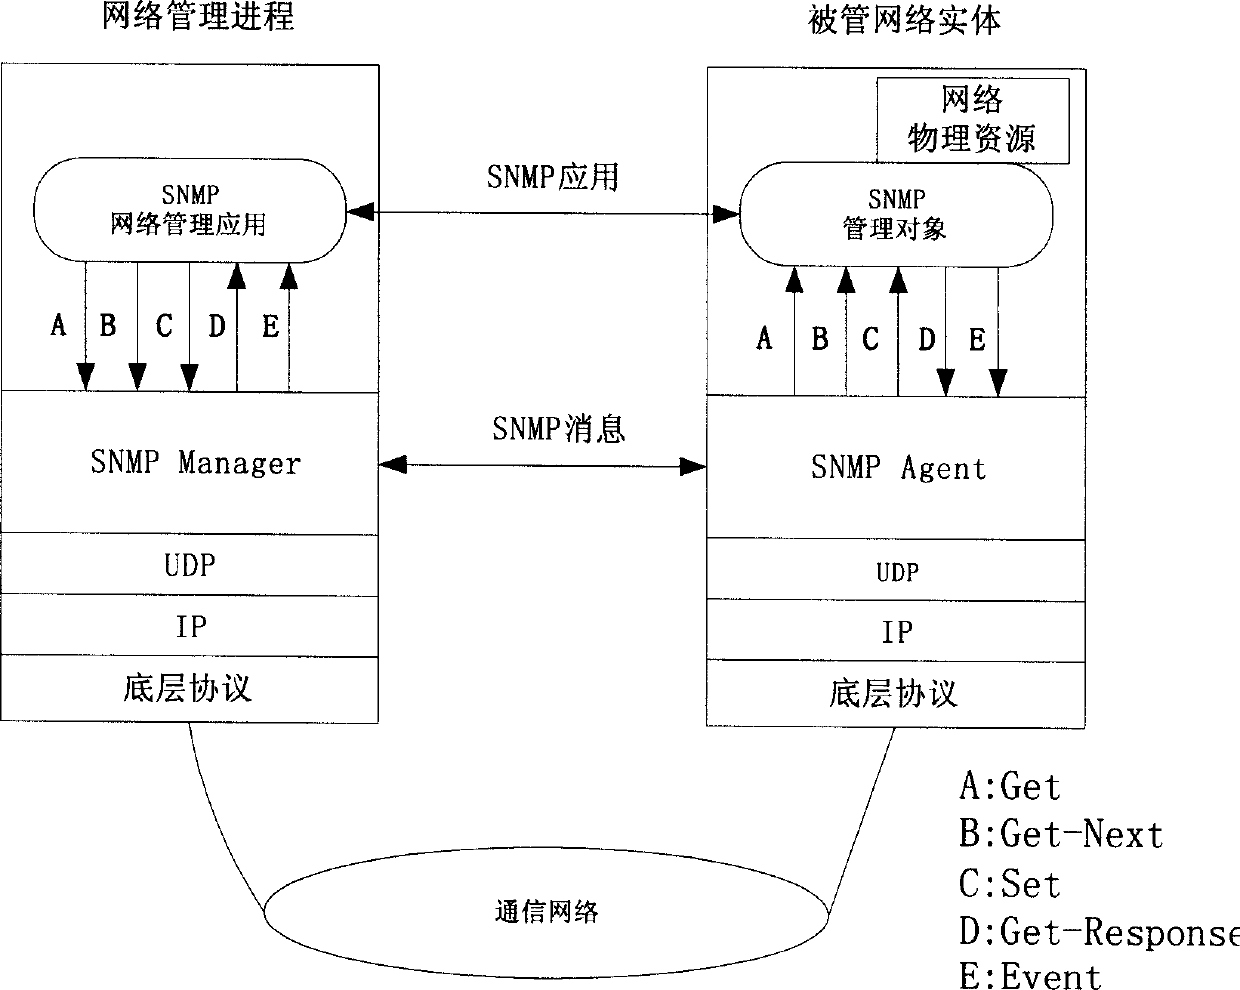 IP network topology discovering method based on SNMP